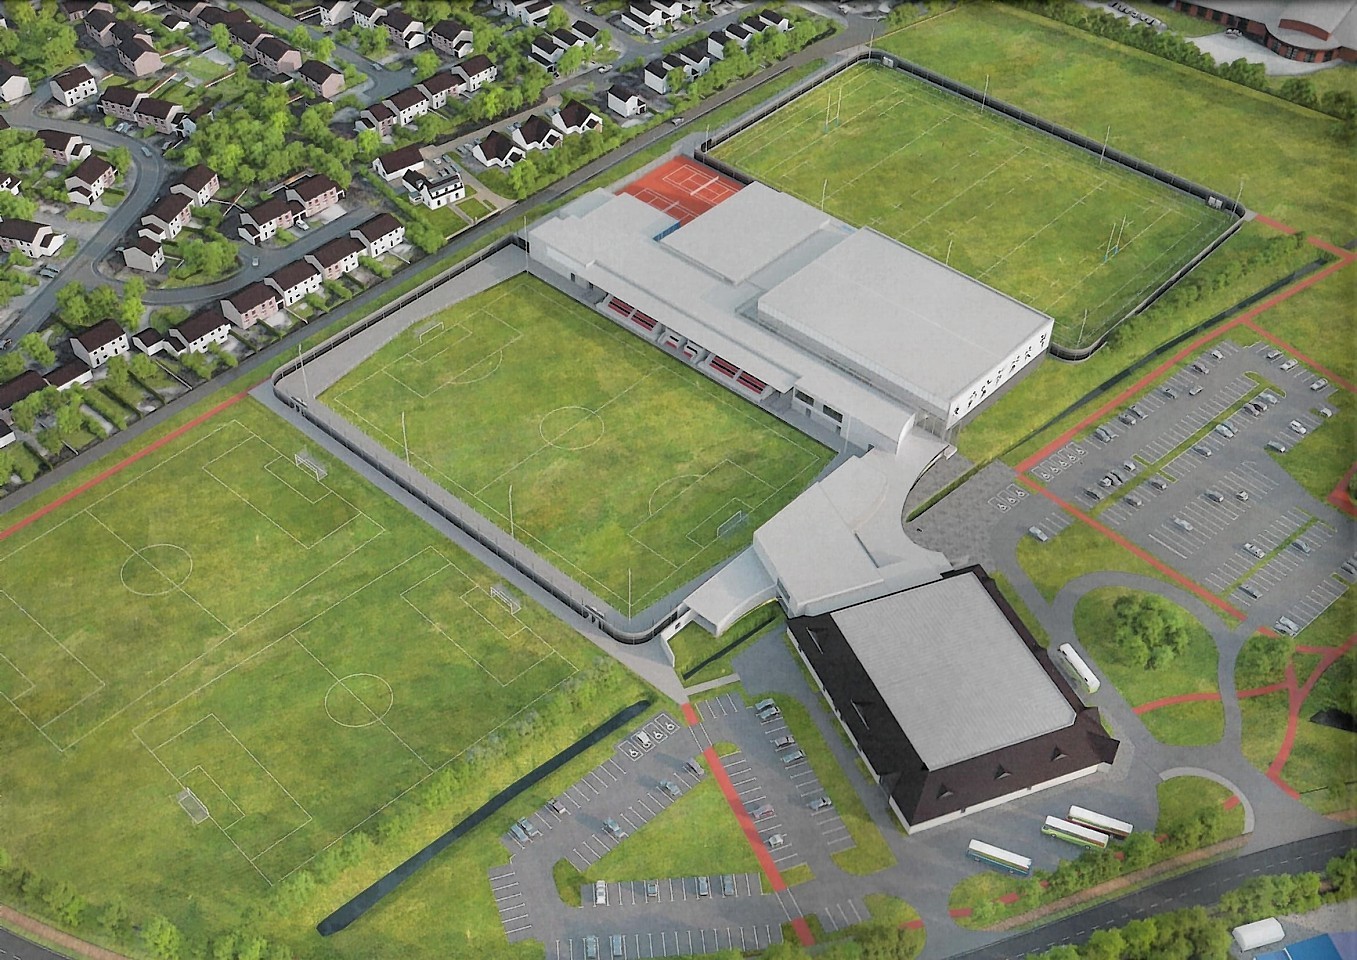 How the Garioch Sports and Community Centre would look